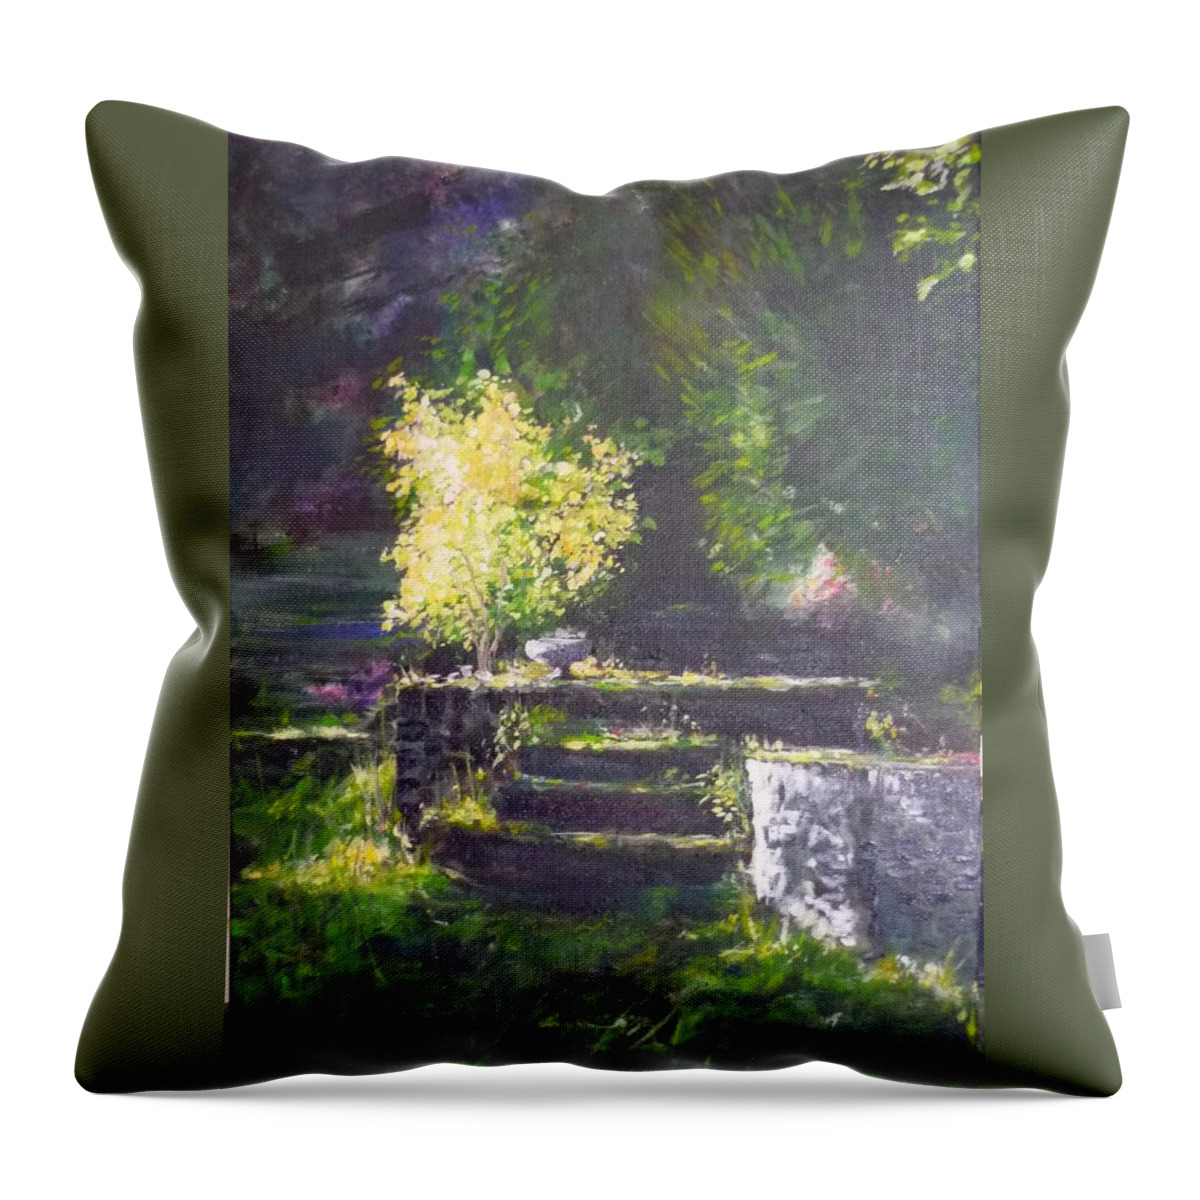 Garden Throw Pillow featuring the painting Naturallly....or A quiet corner by Lizzy Forrester